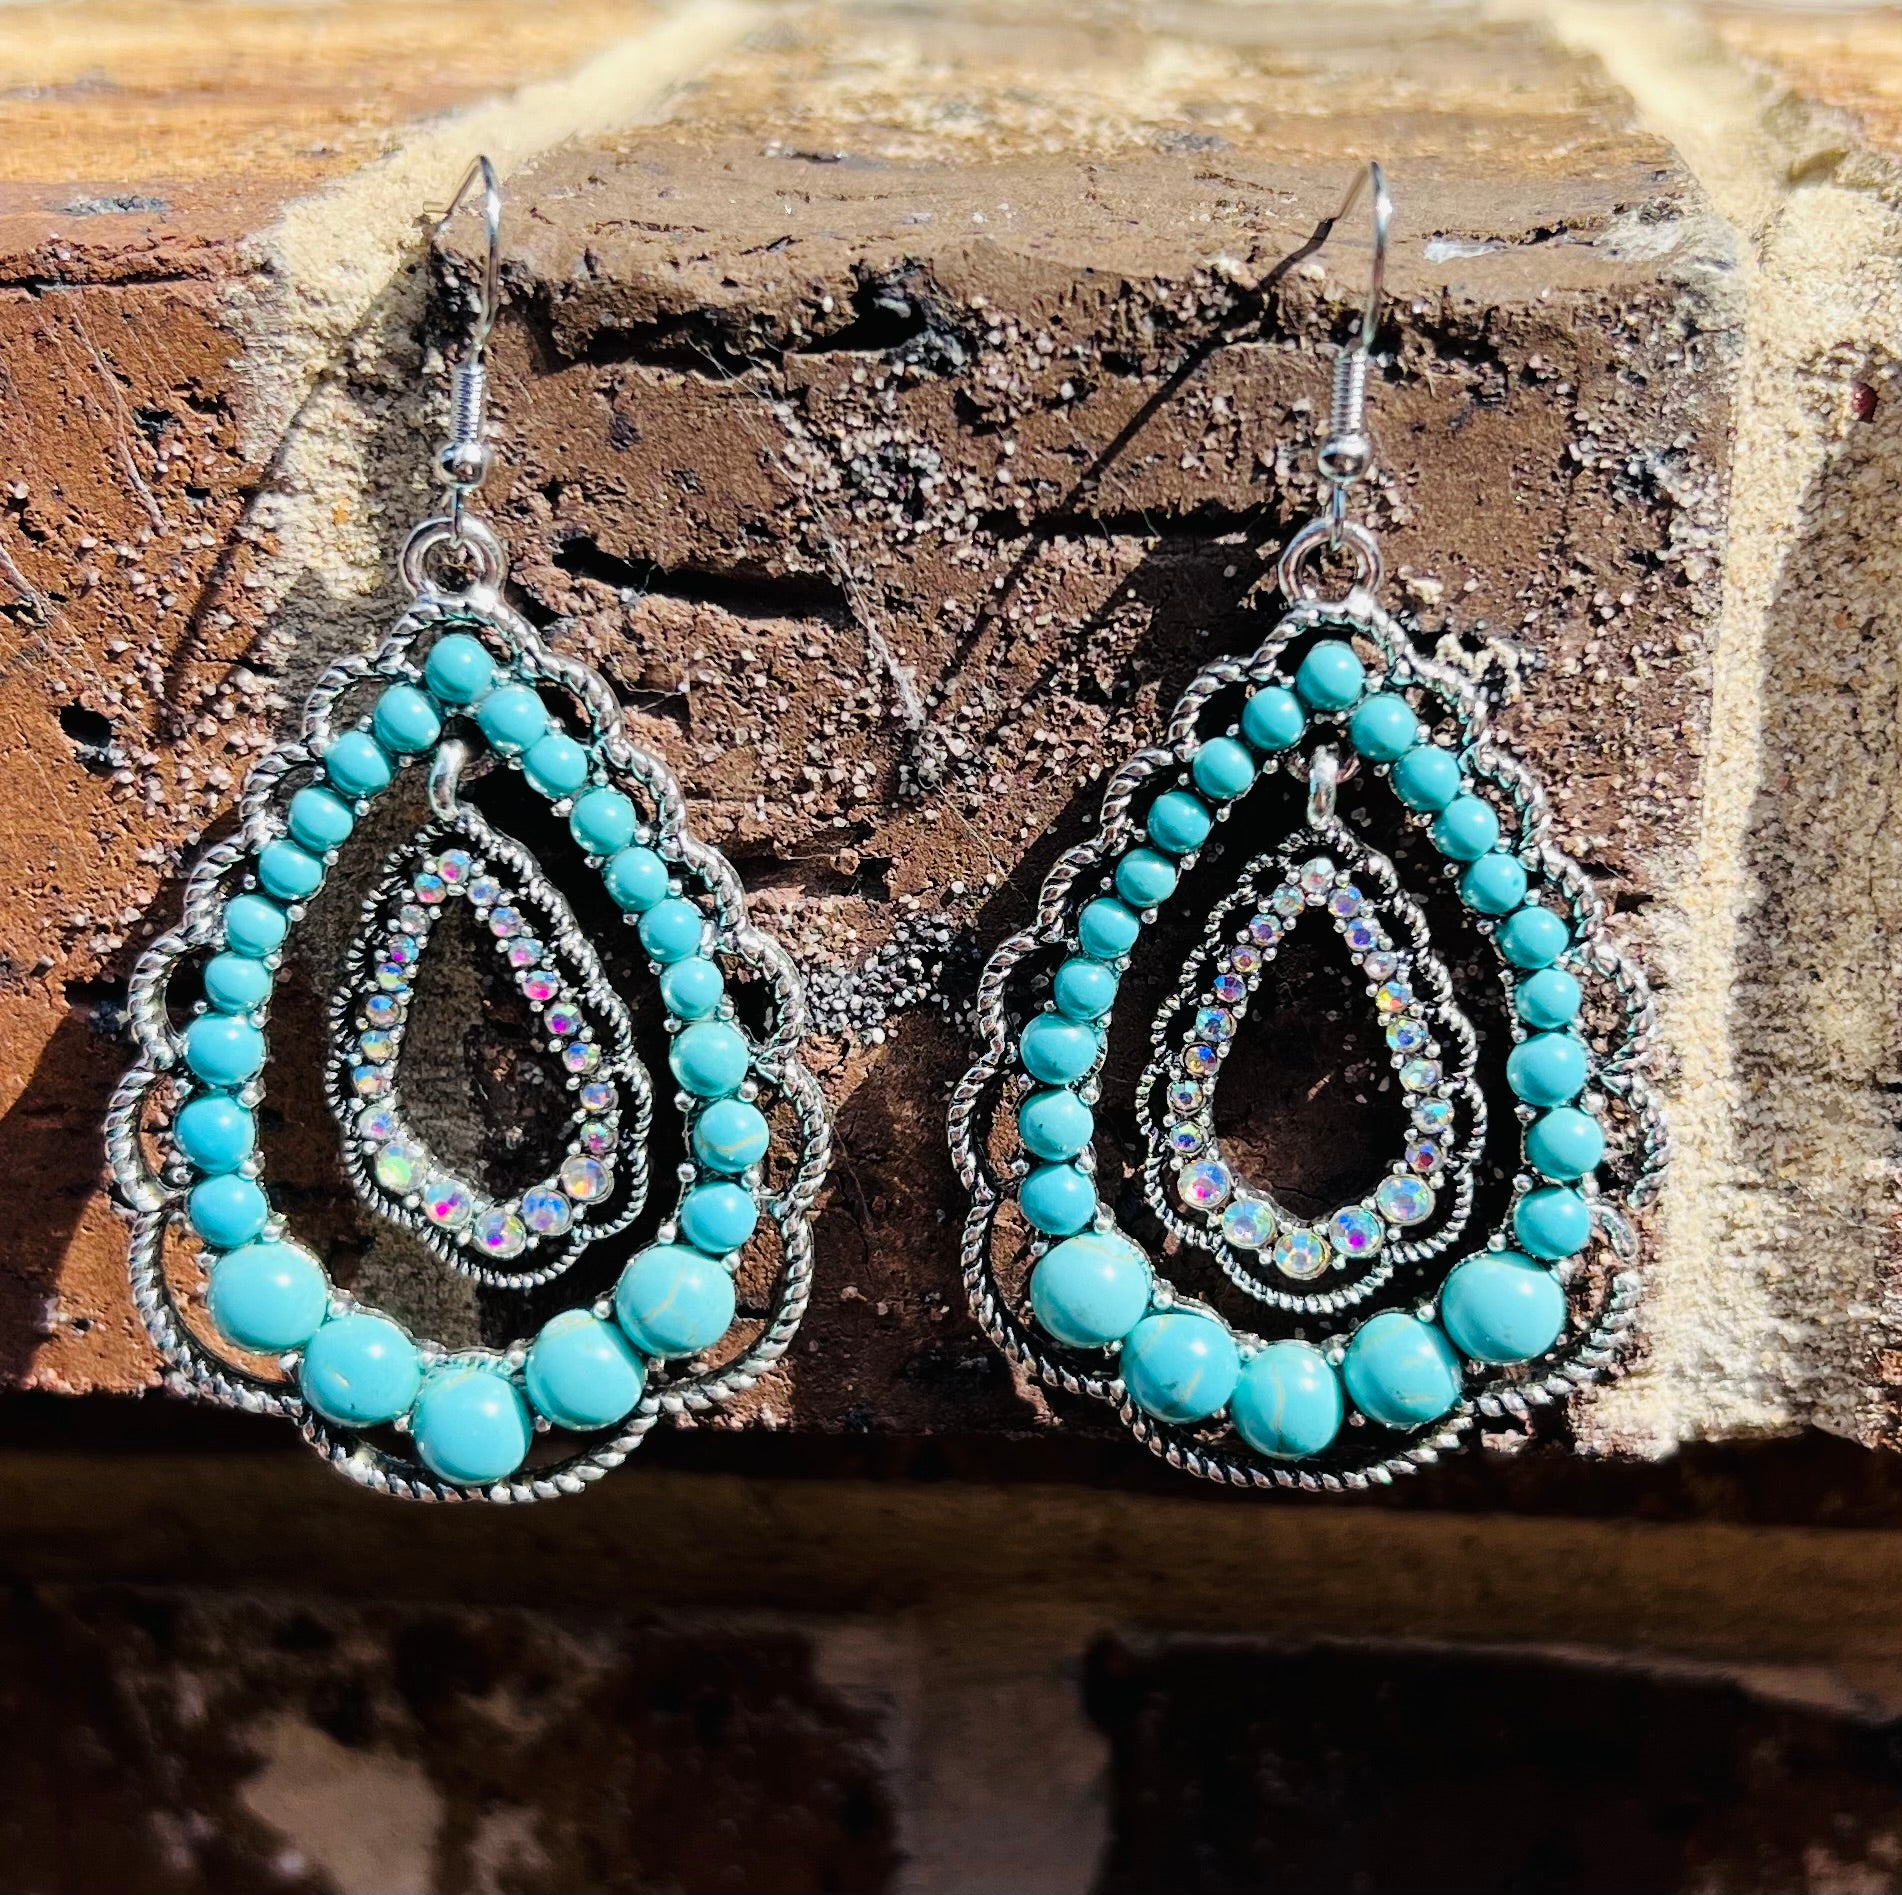 Crystal Squash Blossom Earrings - Turquoise & Silver